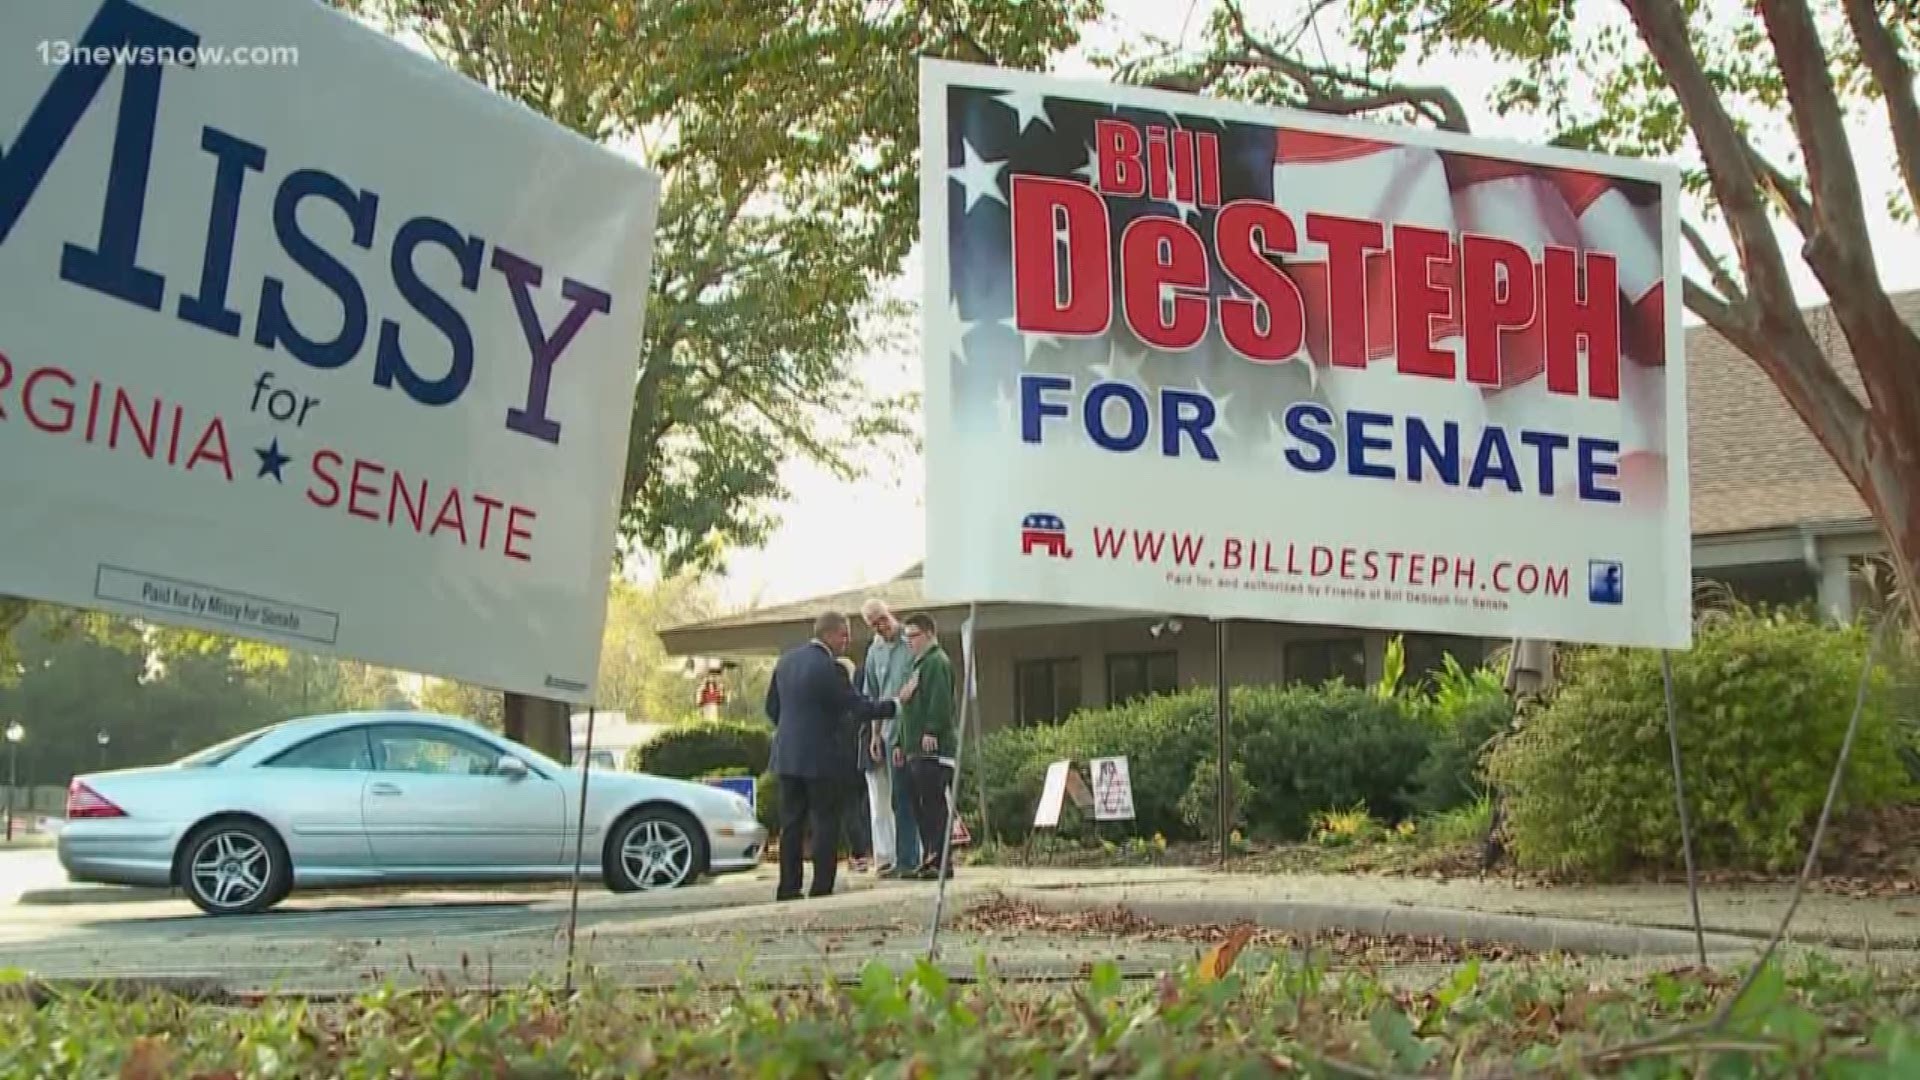 Senator Bill DeSteph has held the seat for the last four years. Missy Cotter Smasal is challenging him for the state senate seat.